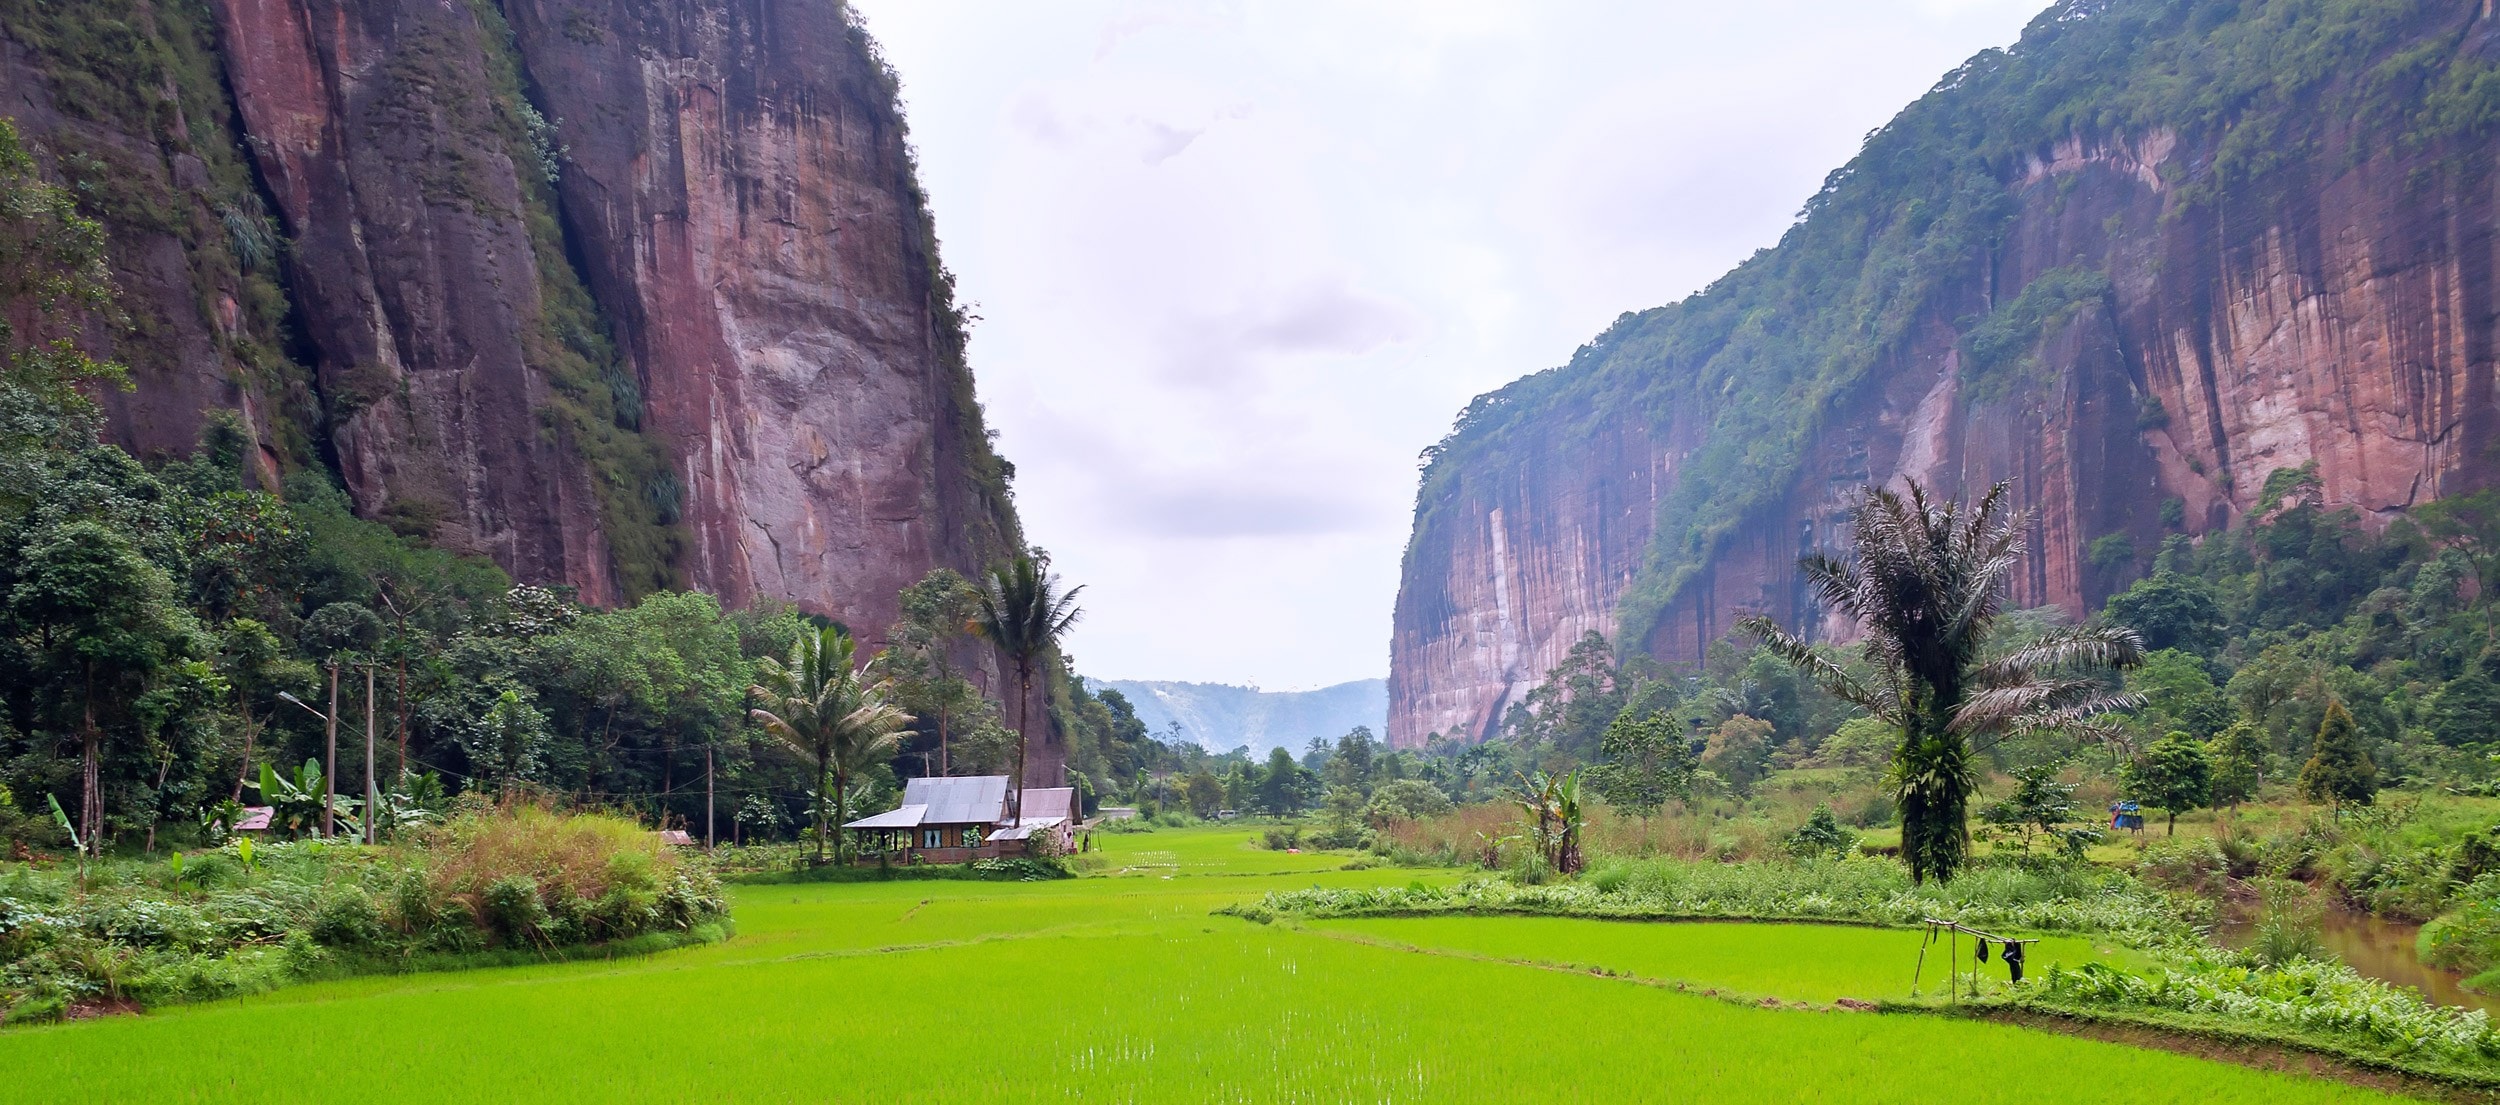 The Harau Valley